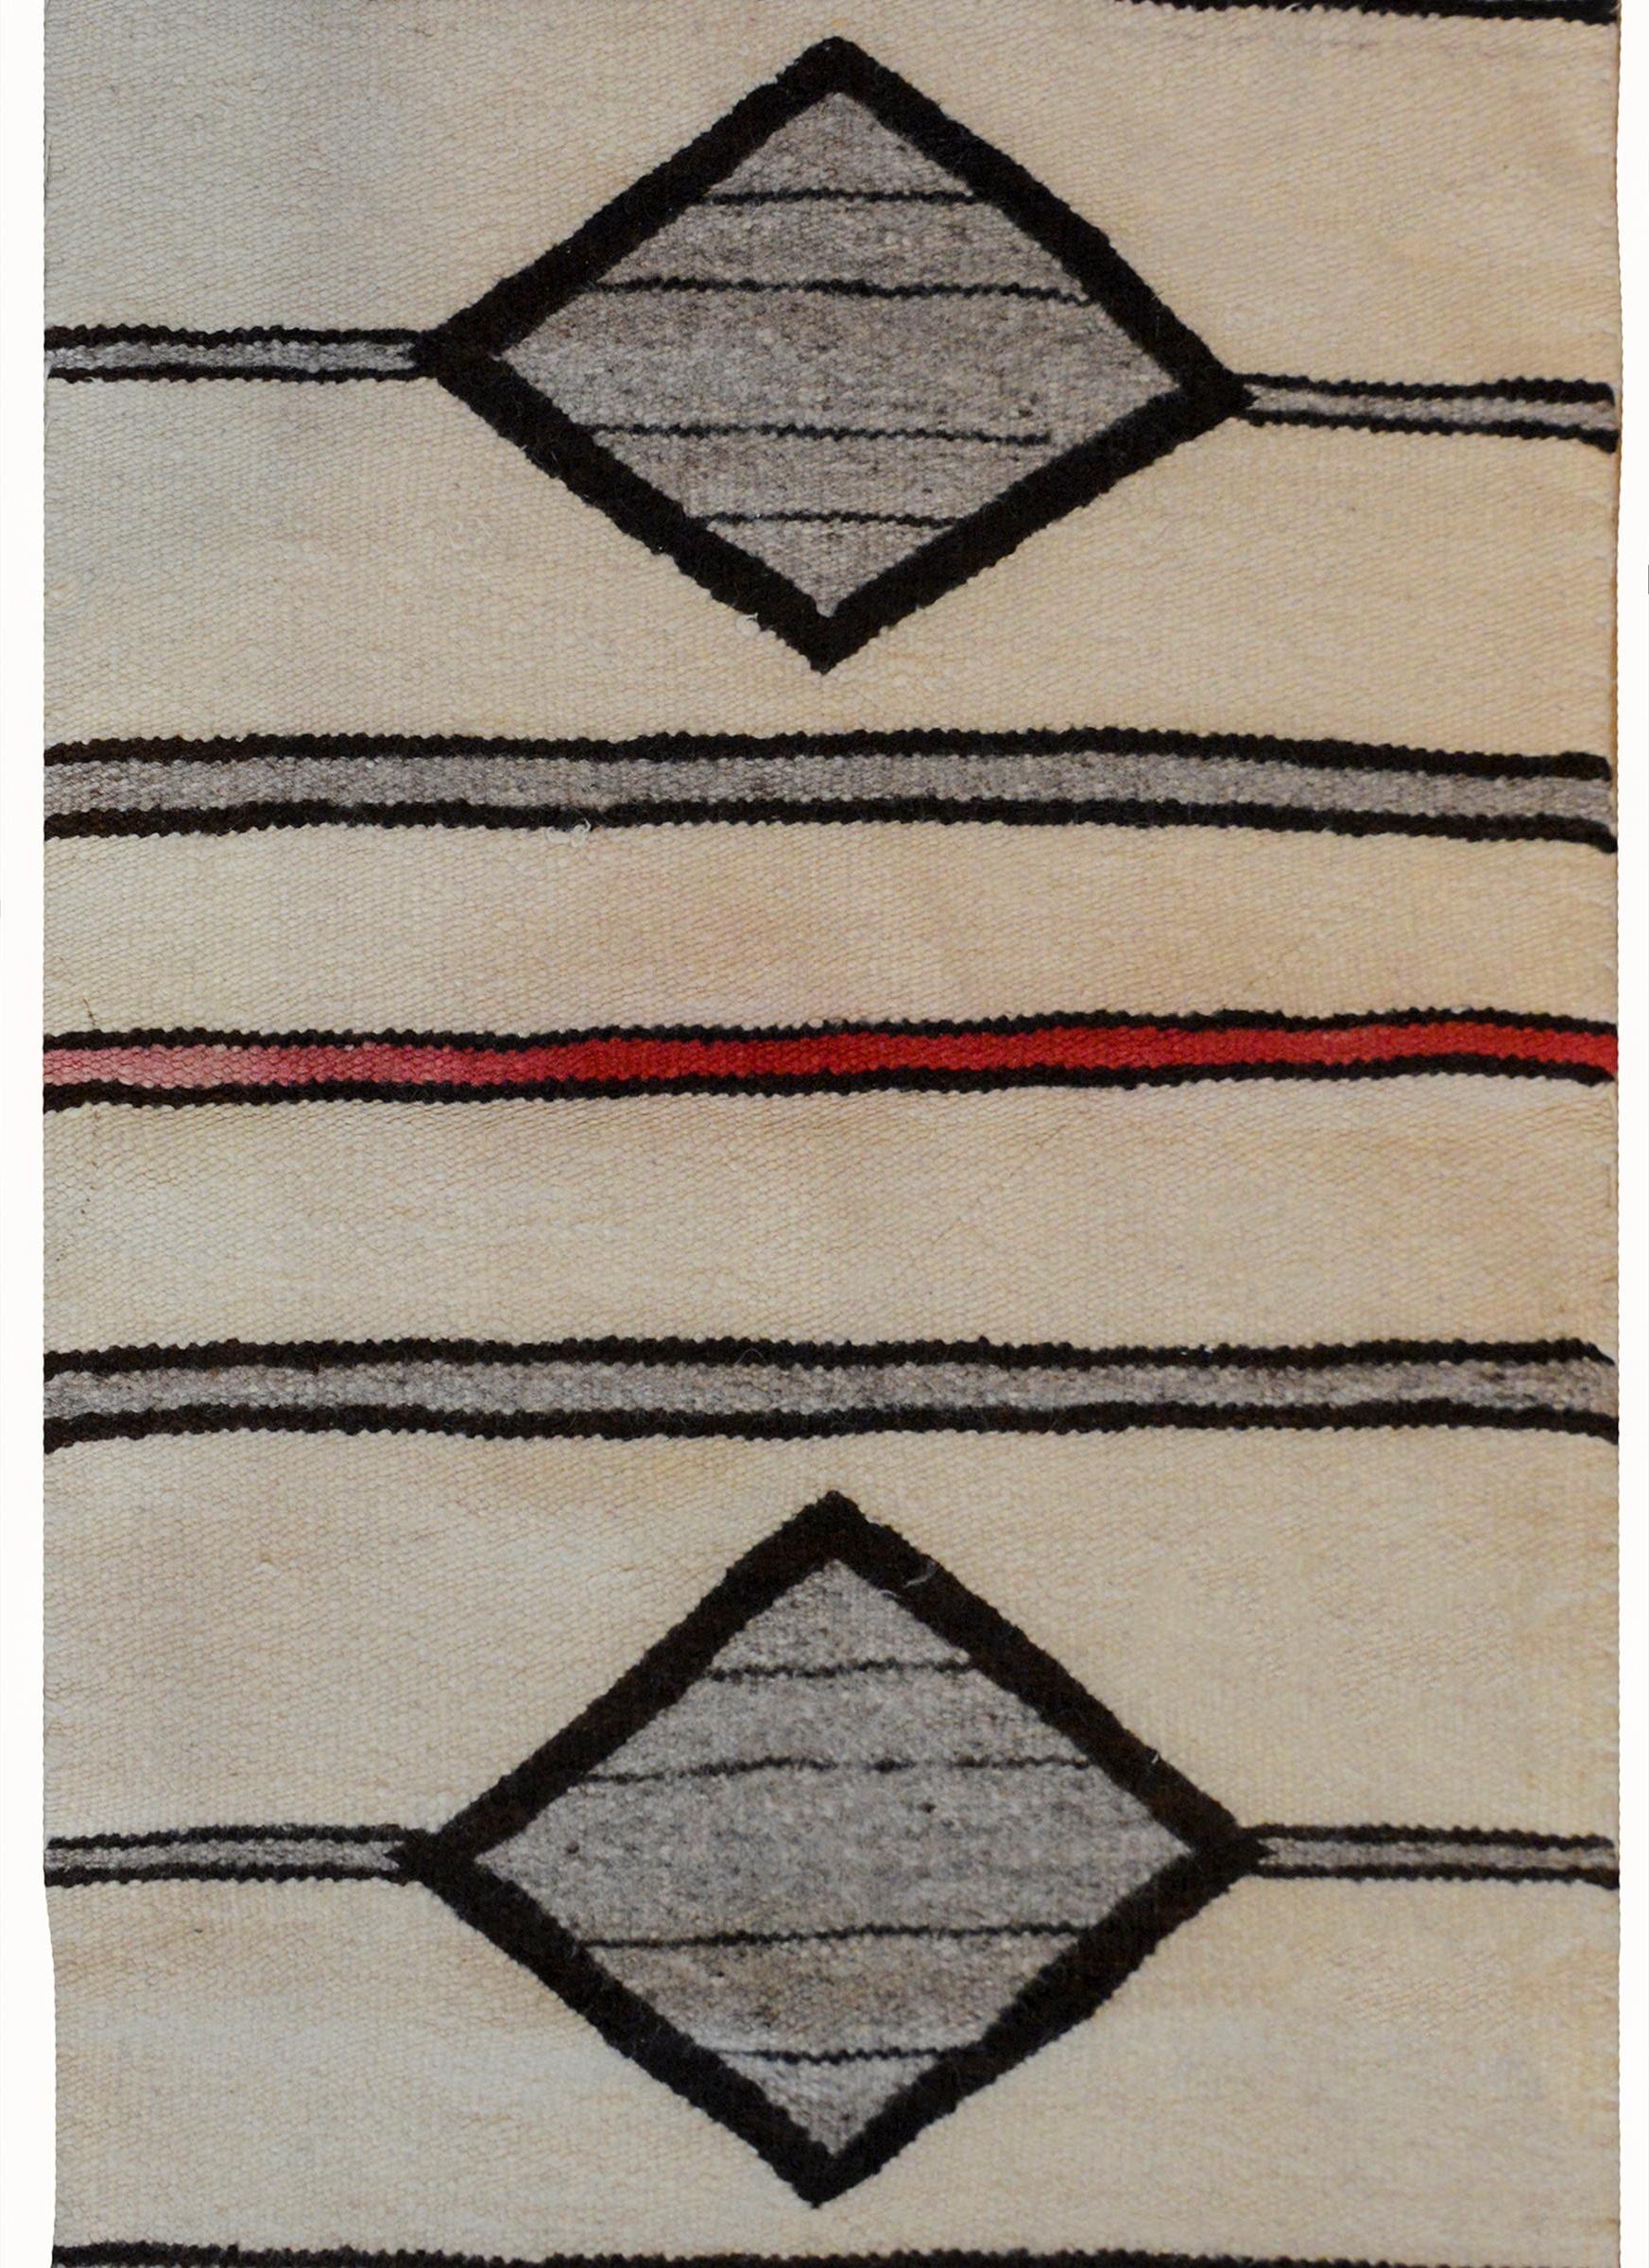 A simple early 20th century Navajo Rug with a cream colored ground, two large gray diamonds, several gray stripes edged in black, with a red stripe in the center.